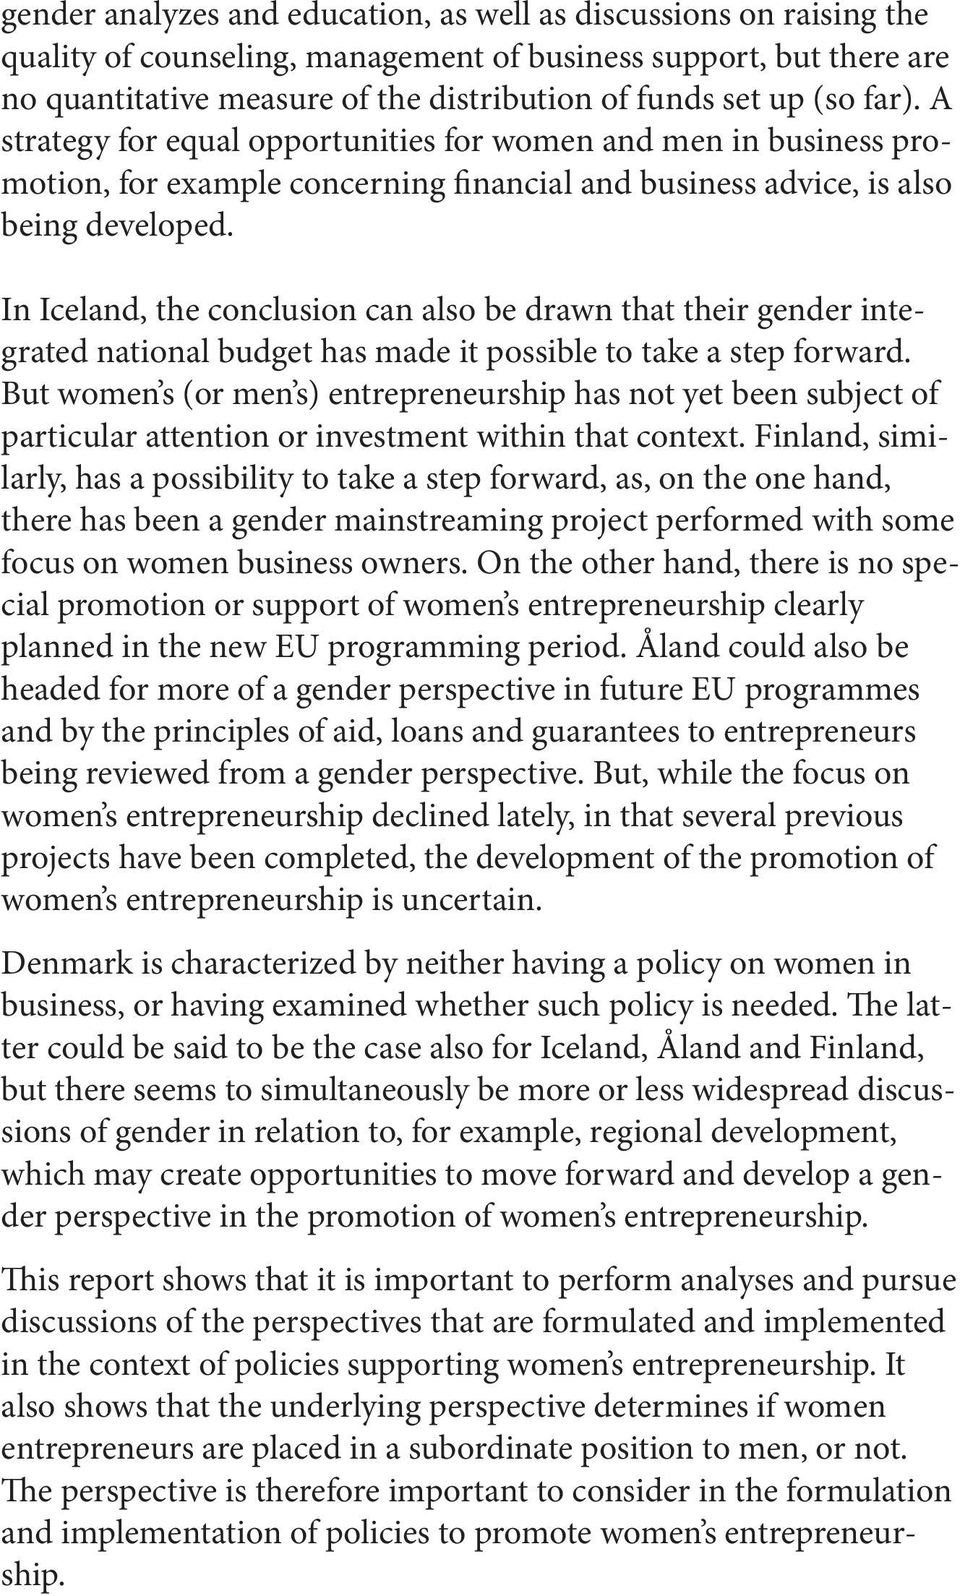 In Iceland, the conclusion can also be drawn that their gender integrated national budget has made it possible to take a step forward.